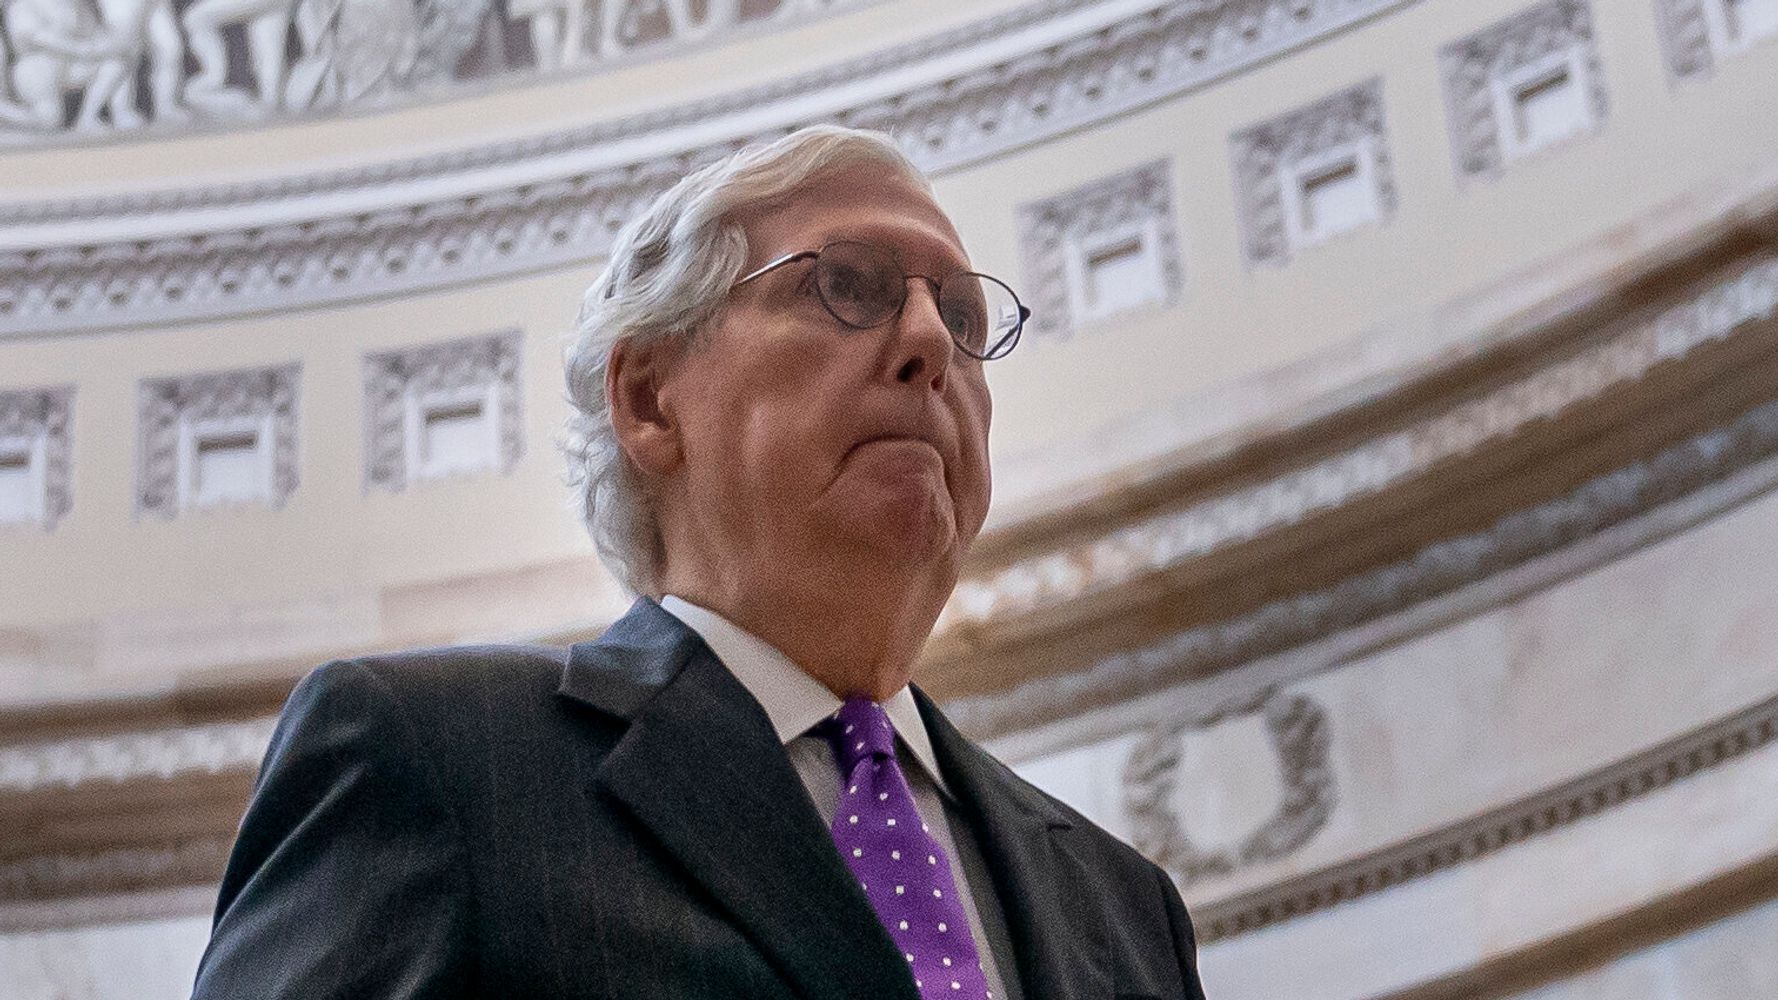 Democrats Outsmart Mitch McConnell With Surprise Reconciliation Deal